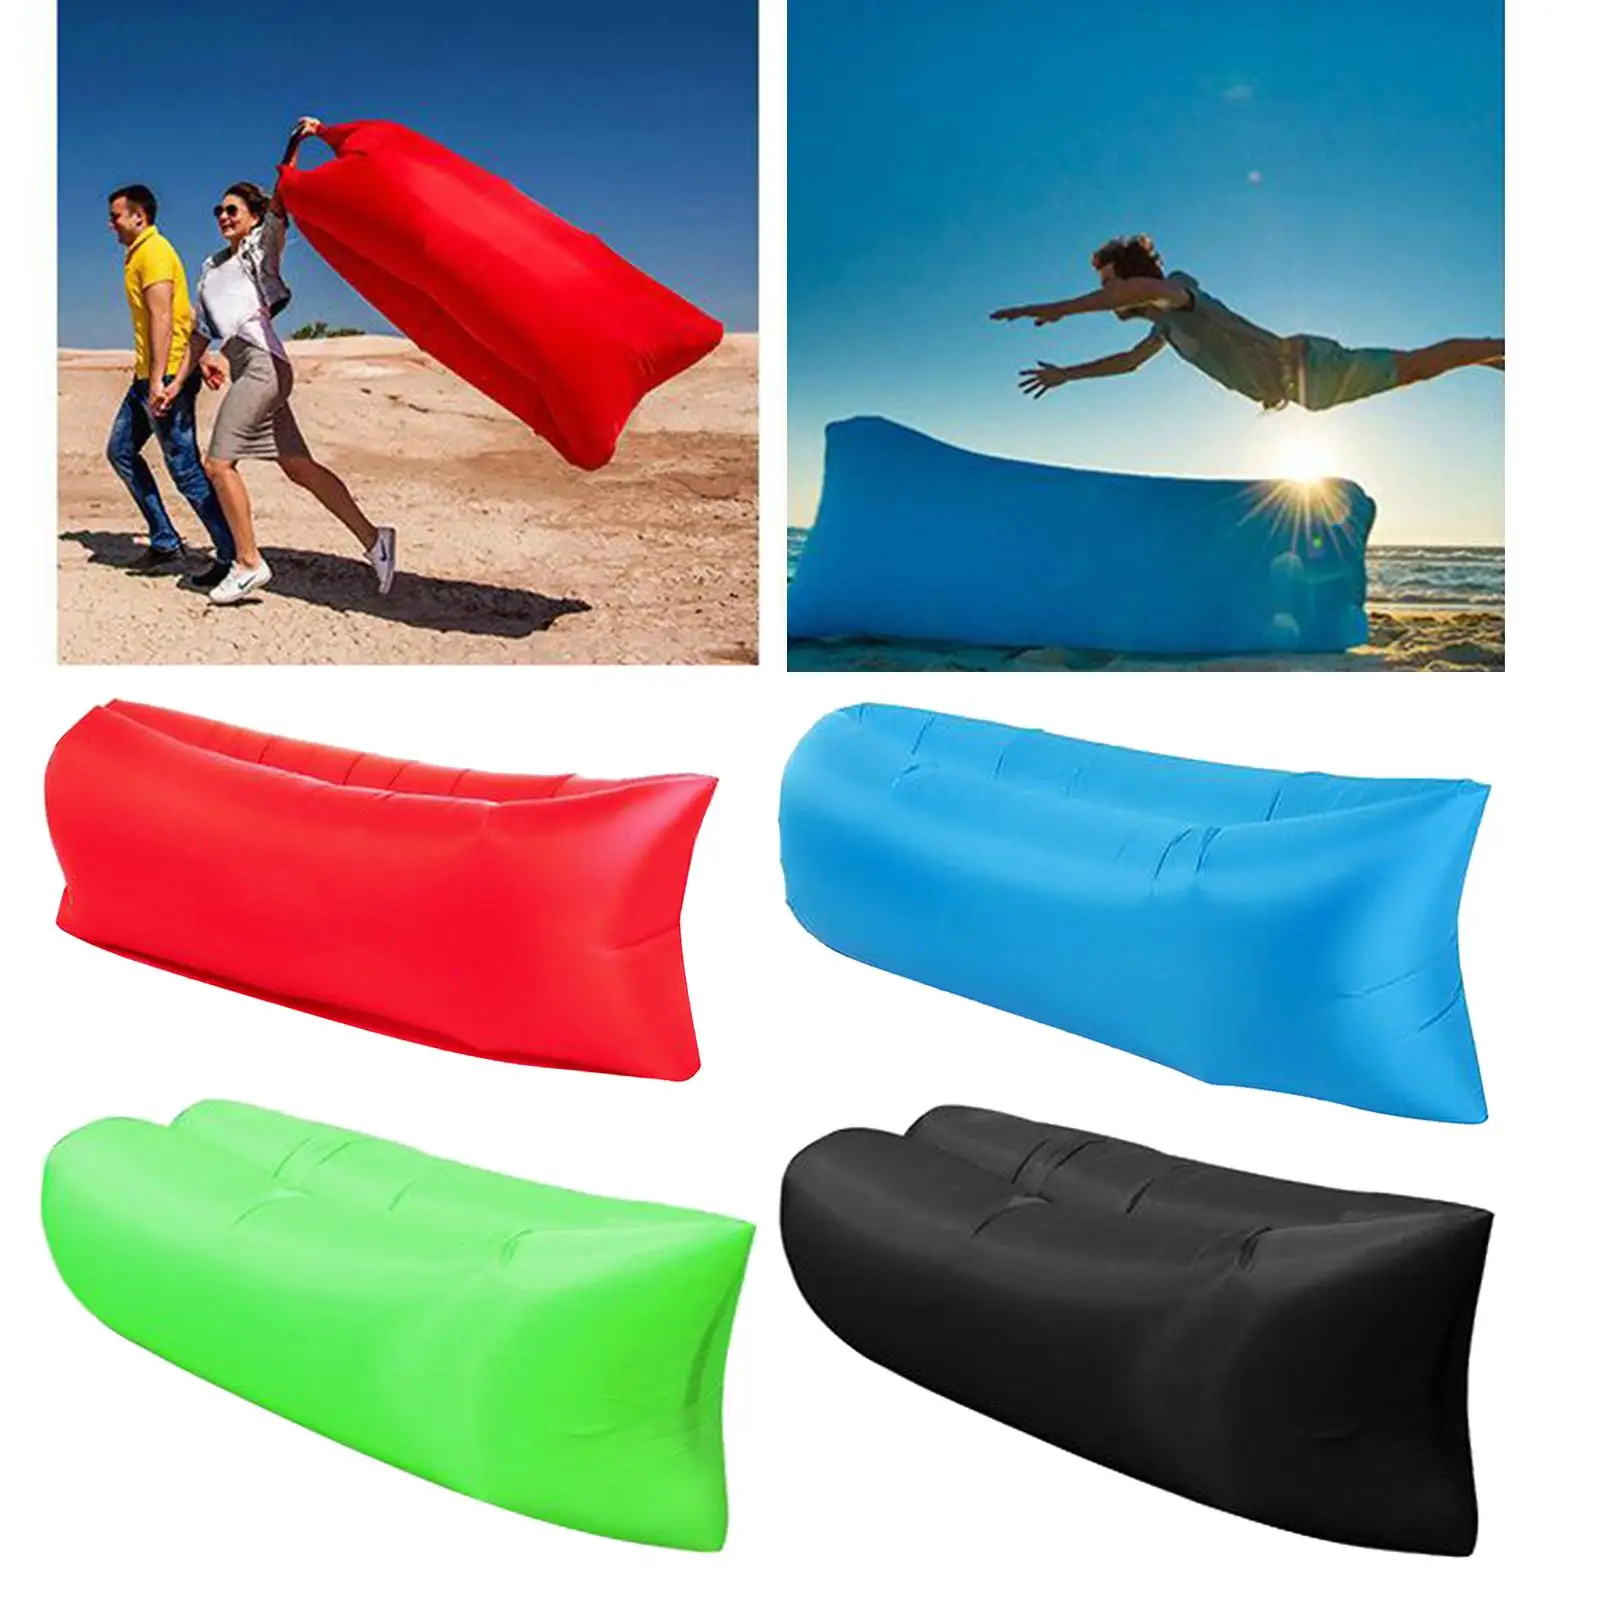 Inflatabler Couch Chair Bag Hangout Outdoor Camping Beach Inflatable Couch Sofa Indoor Outdoor Adults Kids